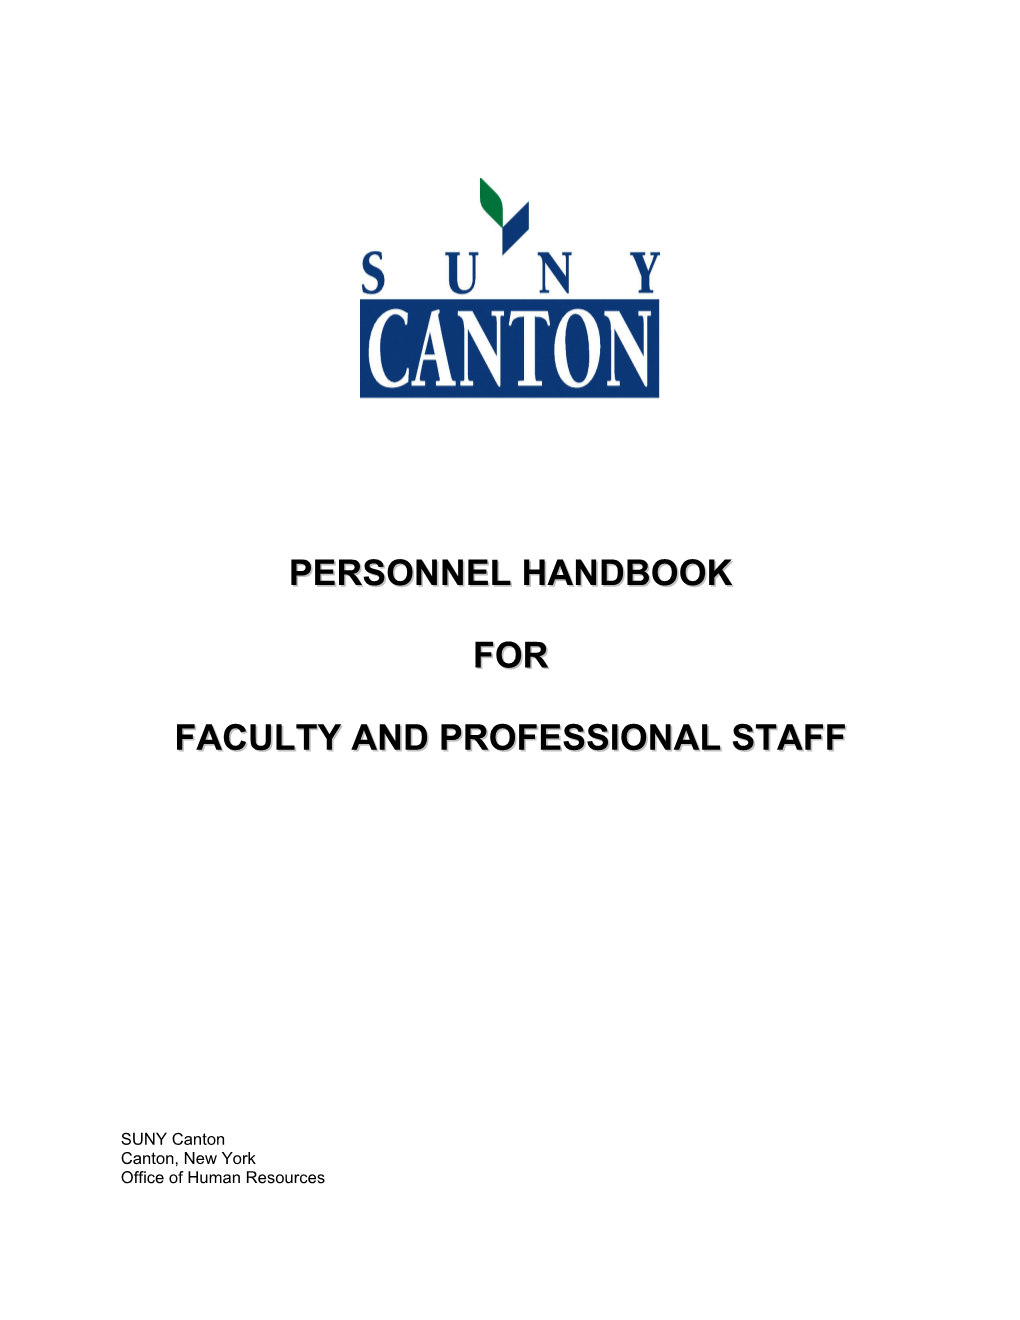 Faculty and Professional Staff